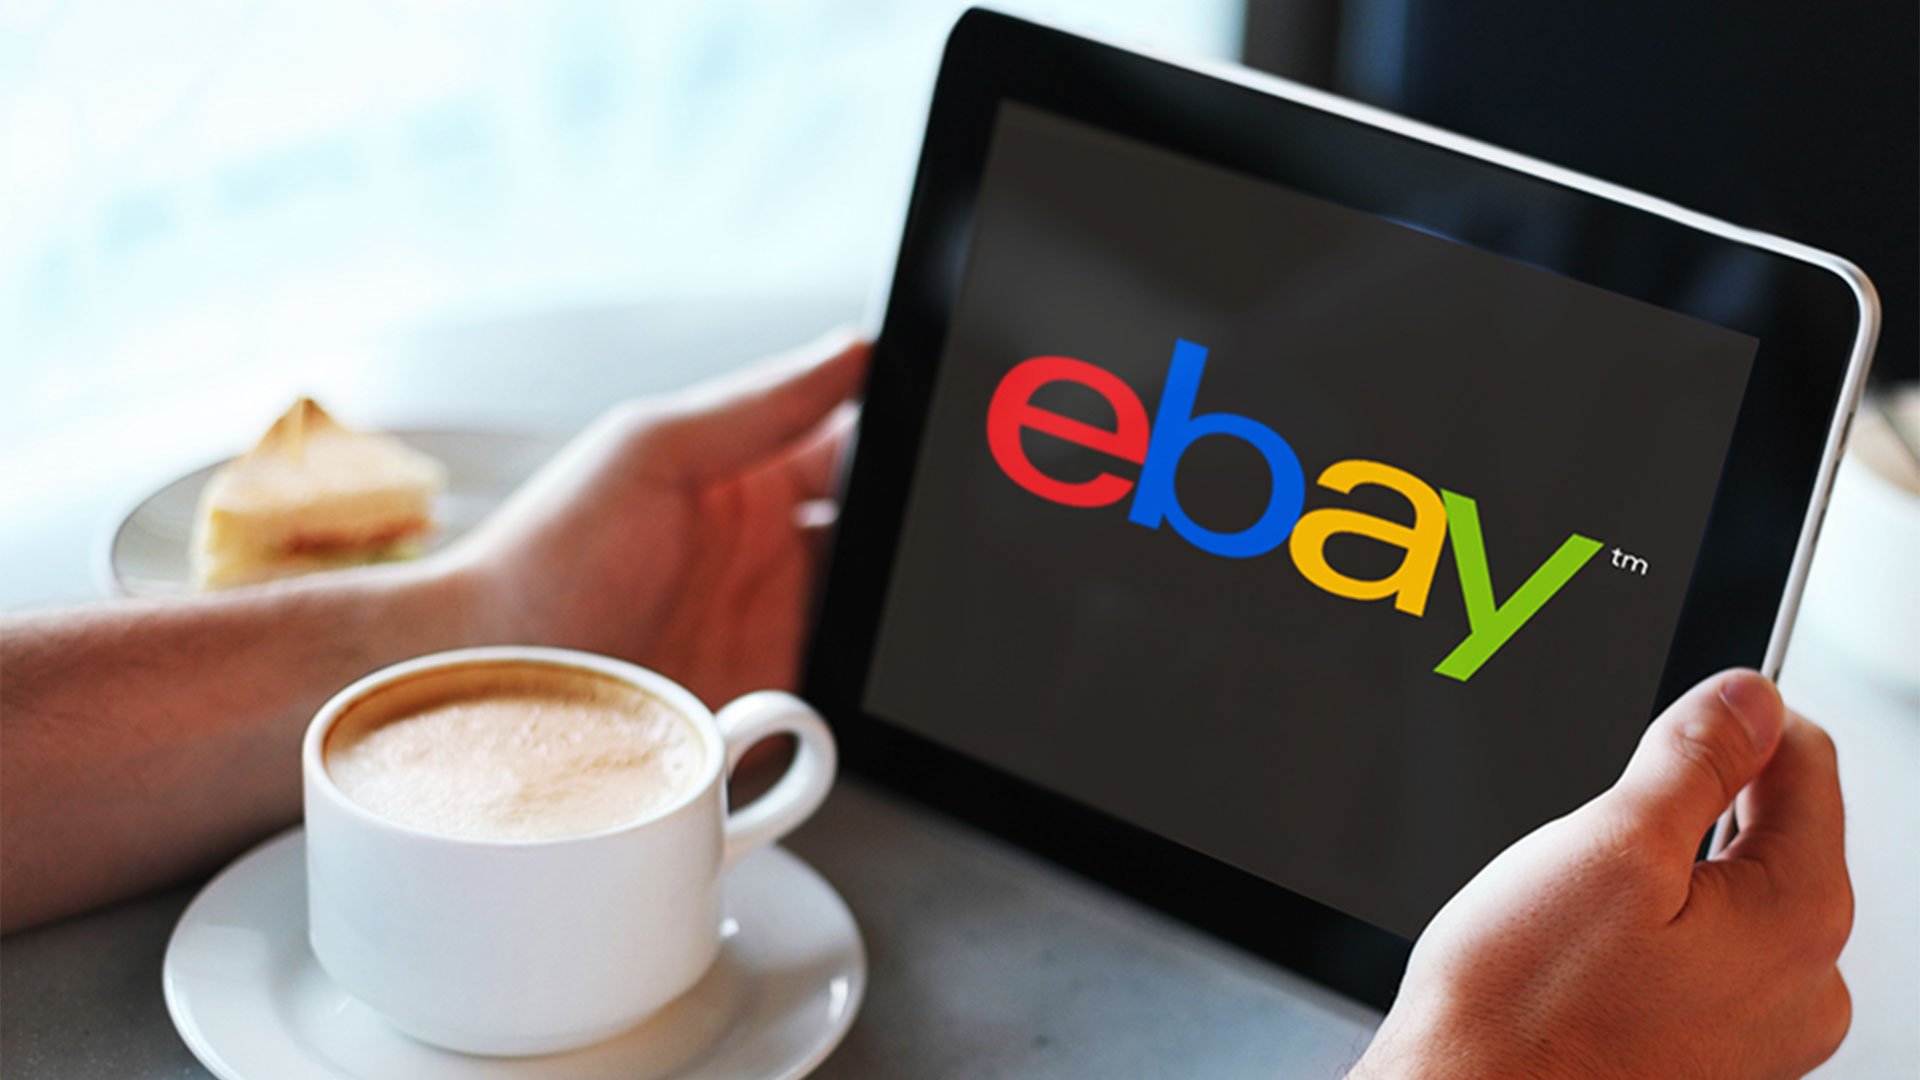 webhomes our work ebay eBay And PayPal Break Up After 15 Years